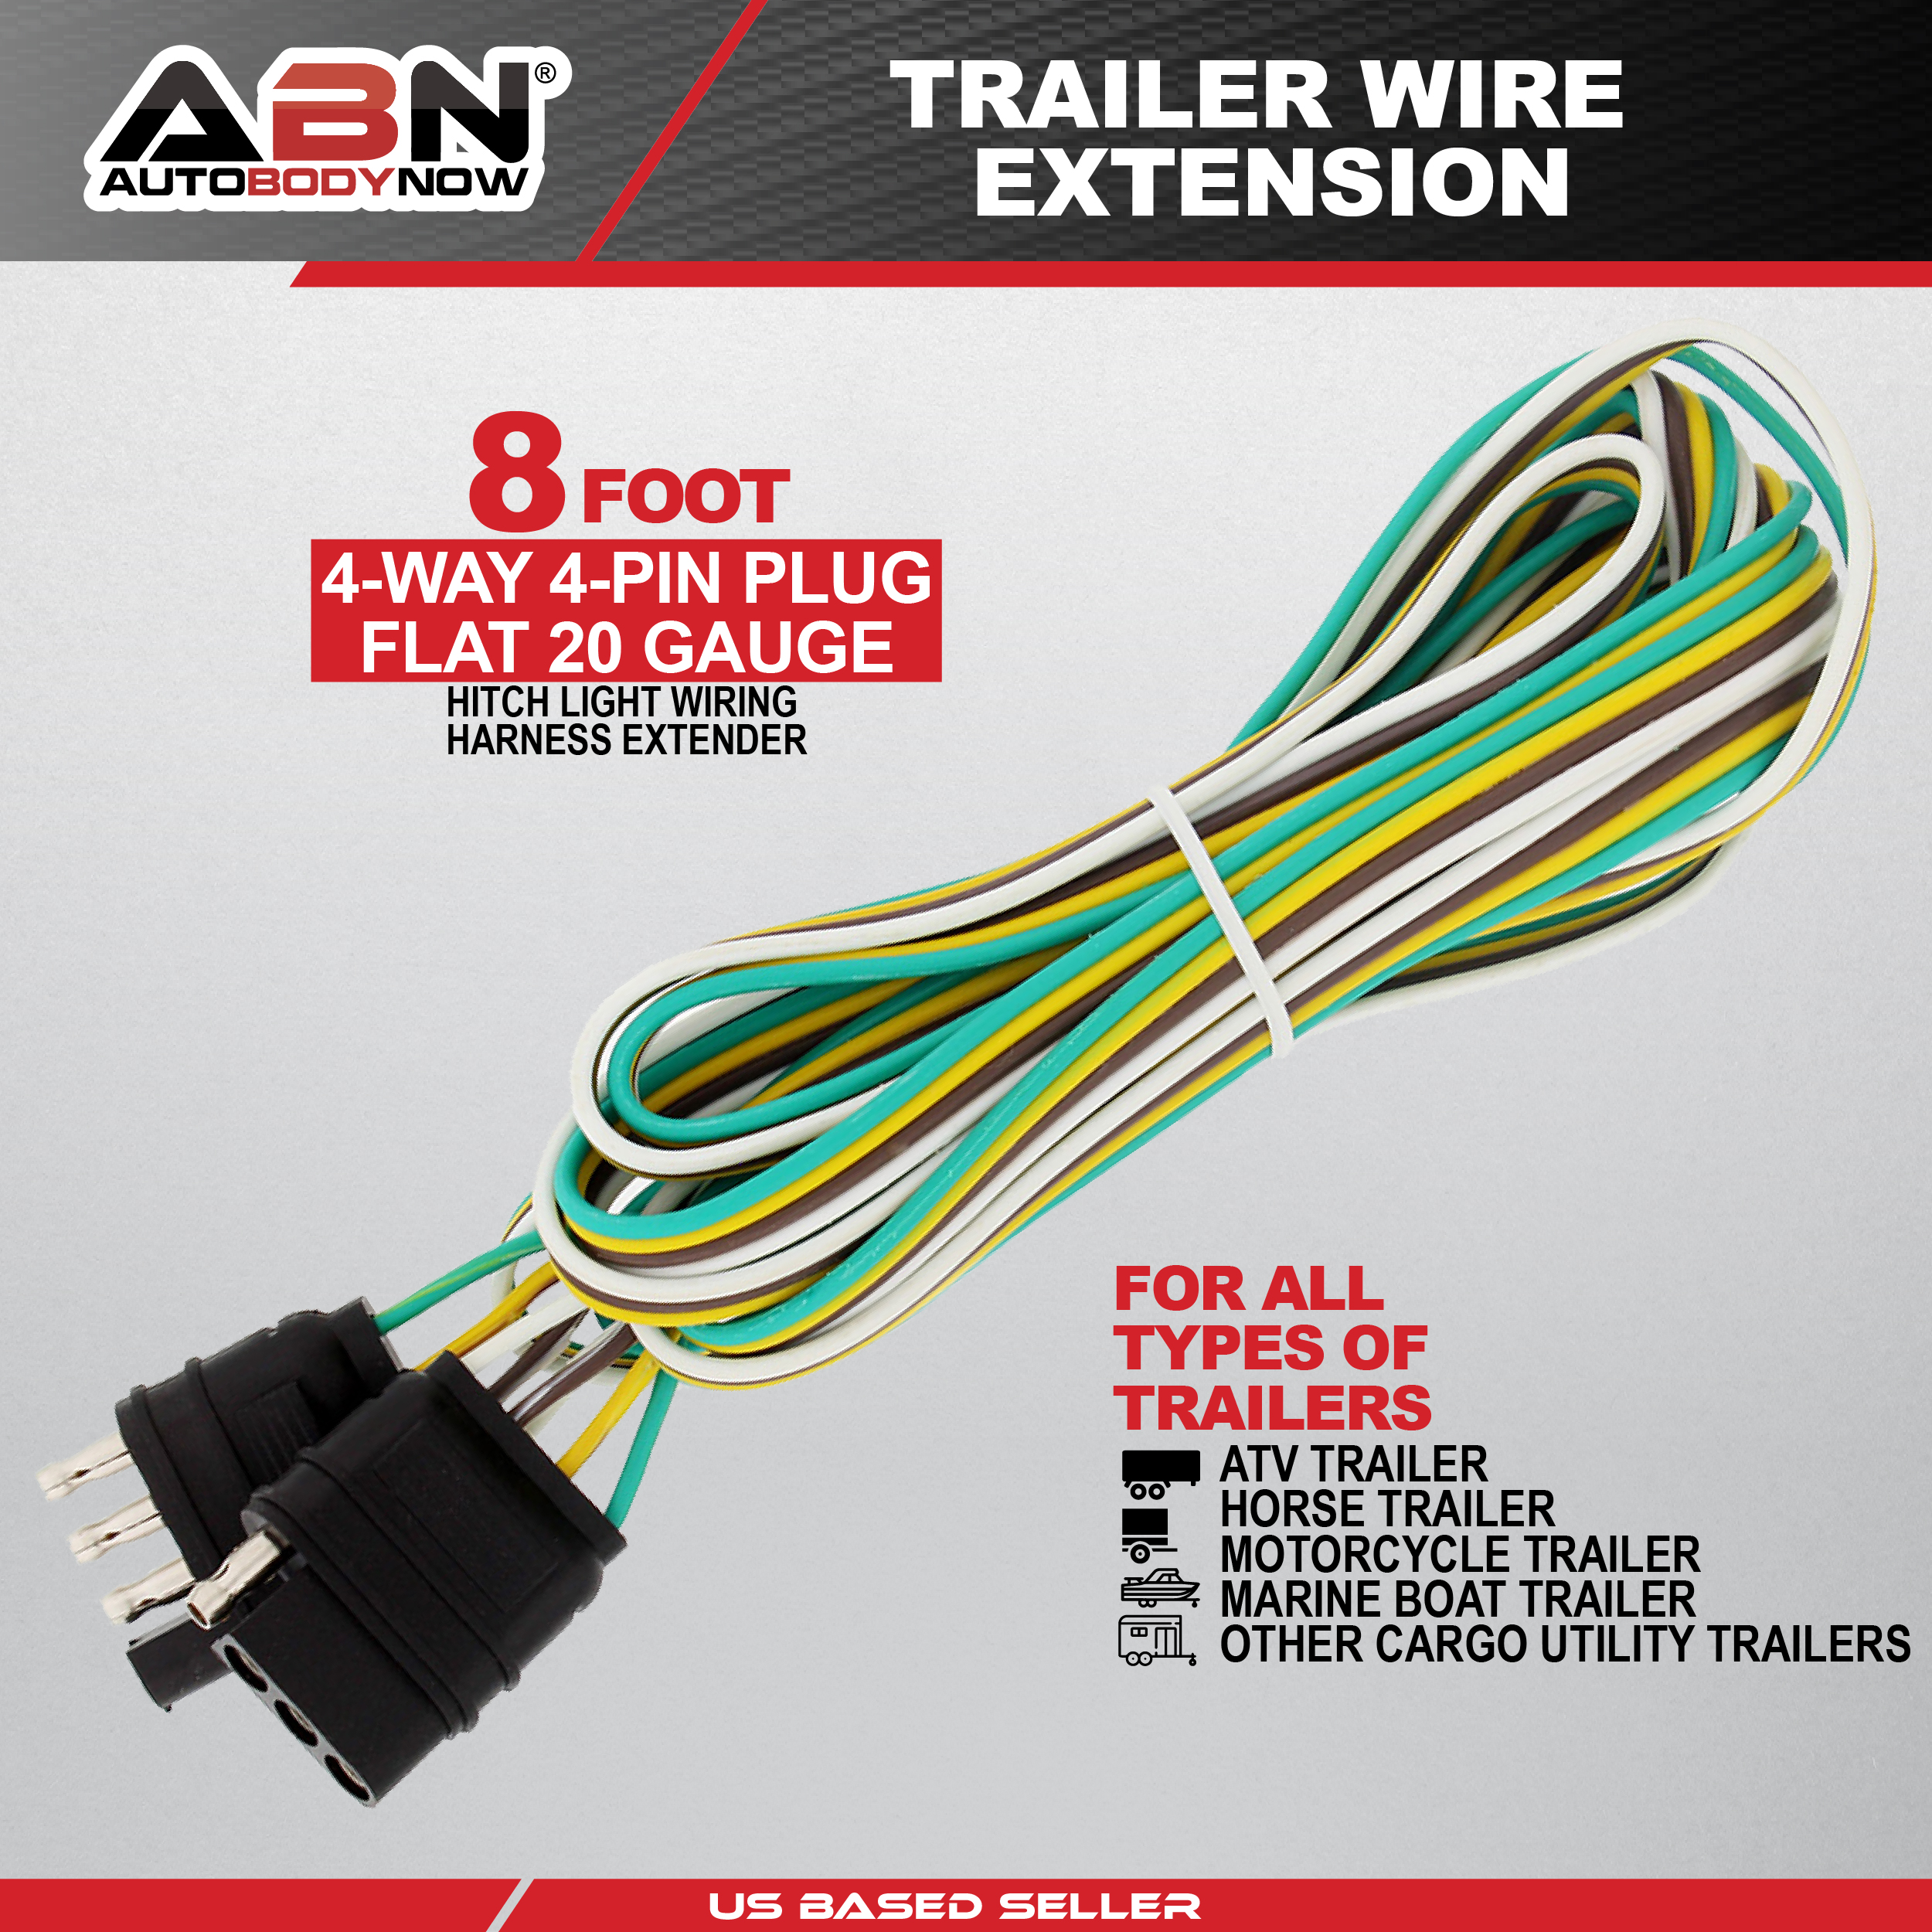 ABN 1909 - 4 Way 4 Pin Plug 20 Gauge Trailer Light Wiring Harness Extension 8ft - image 2 of 7